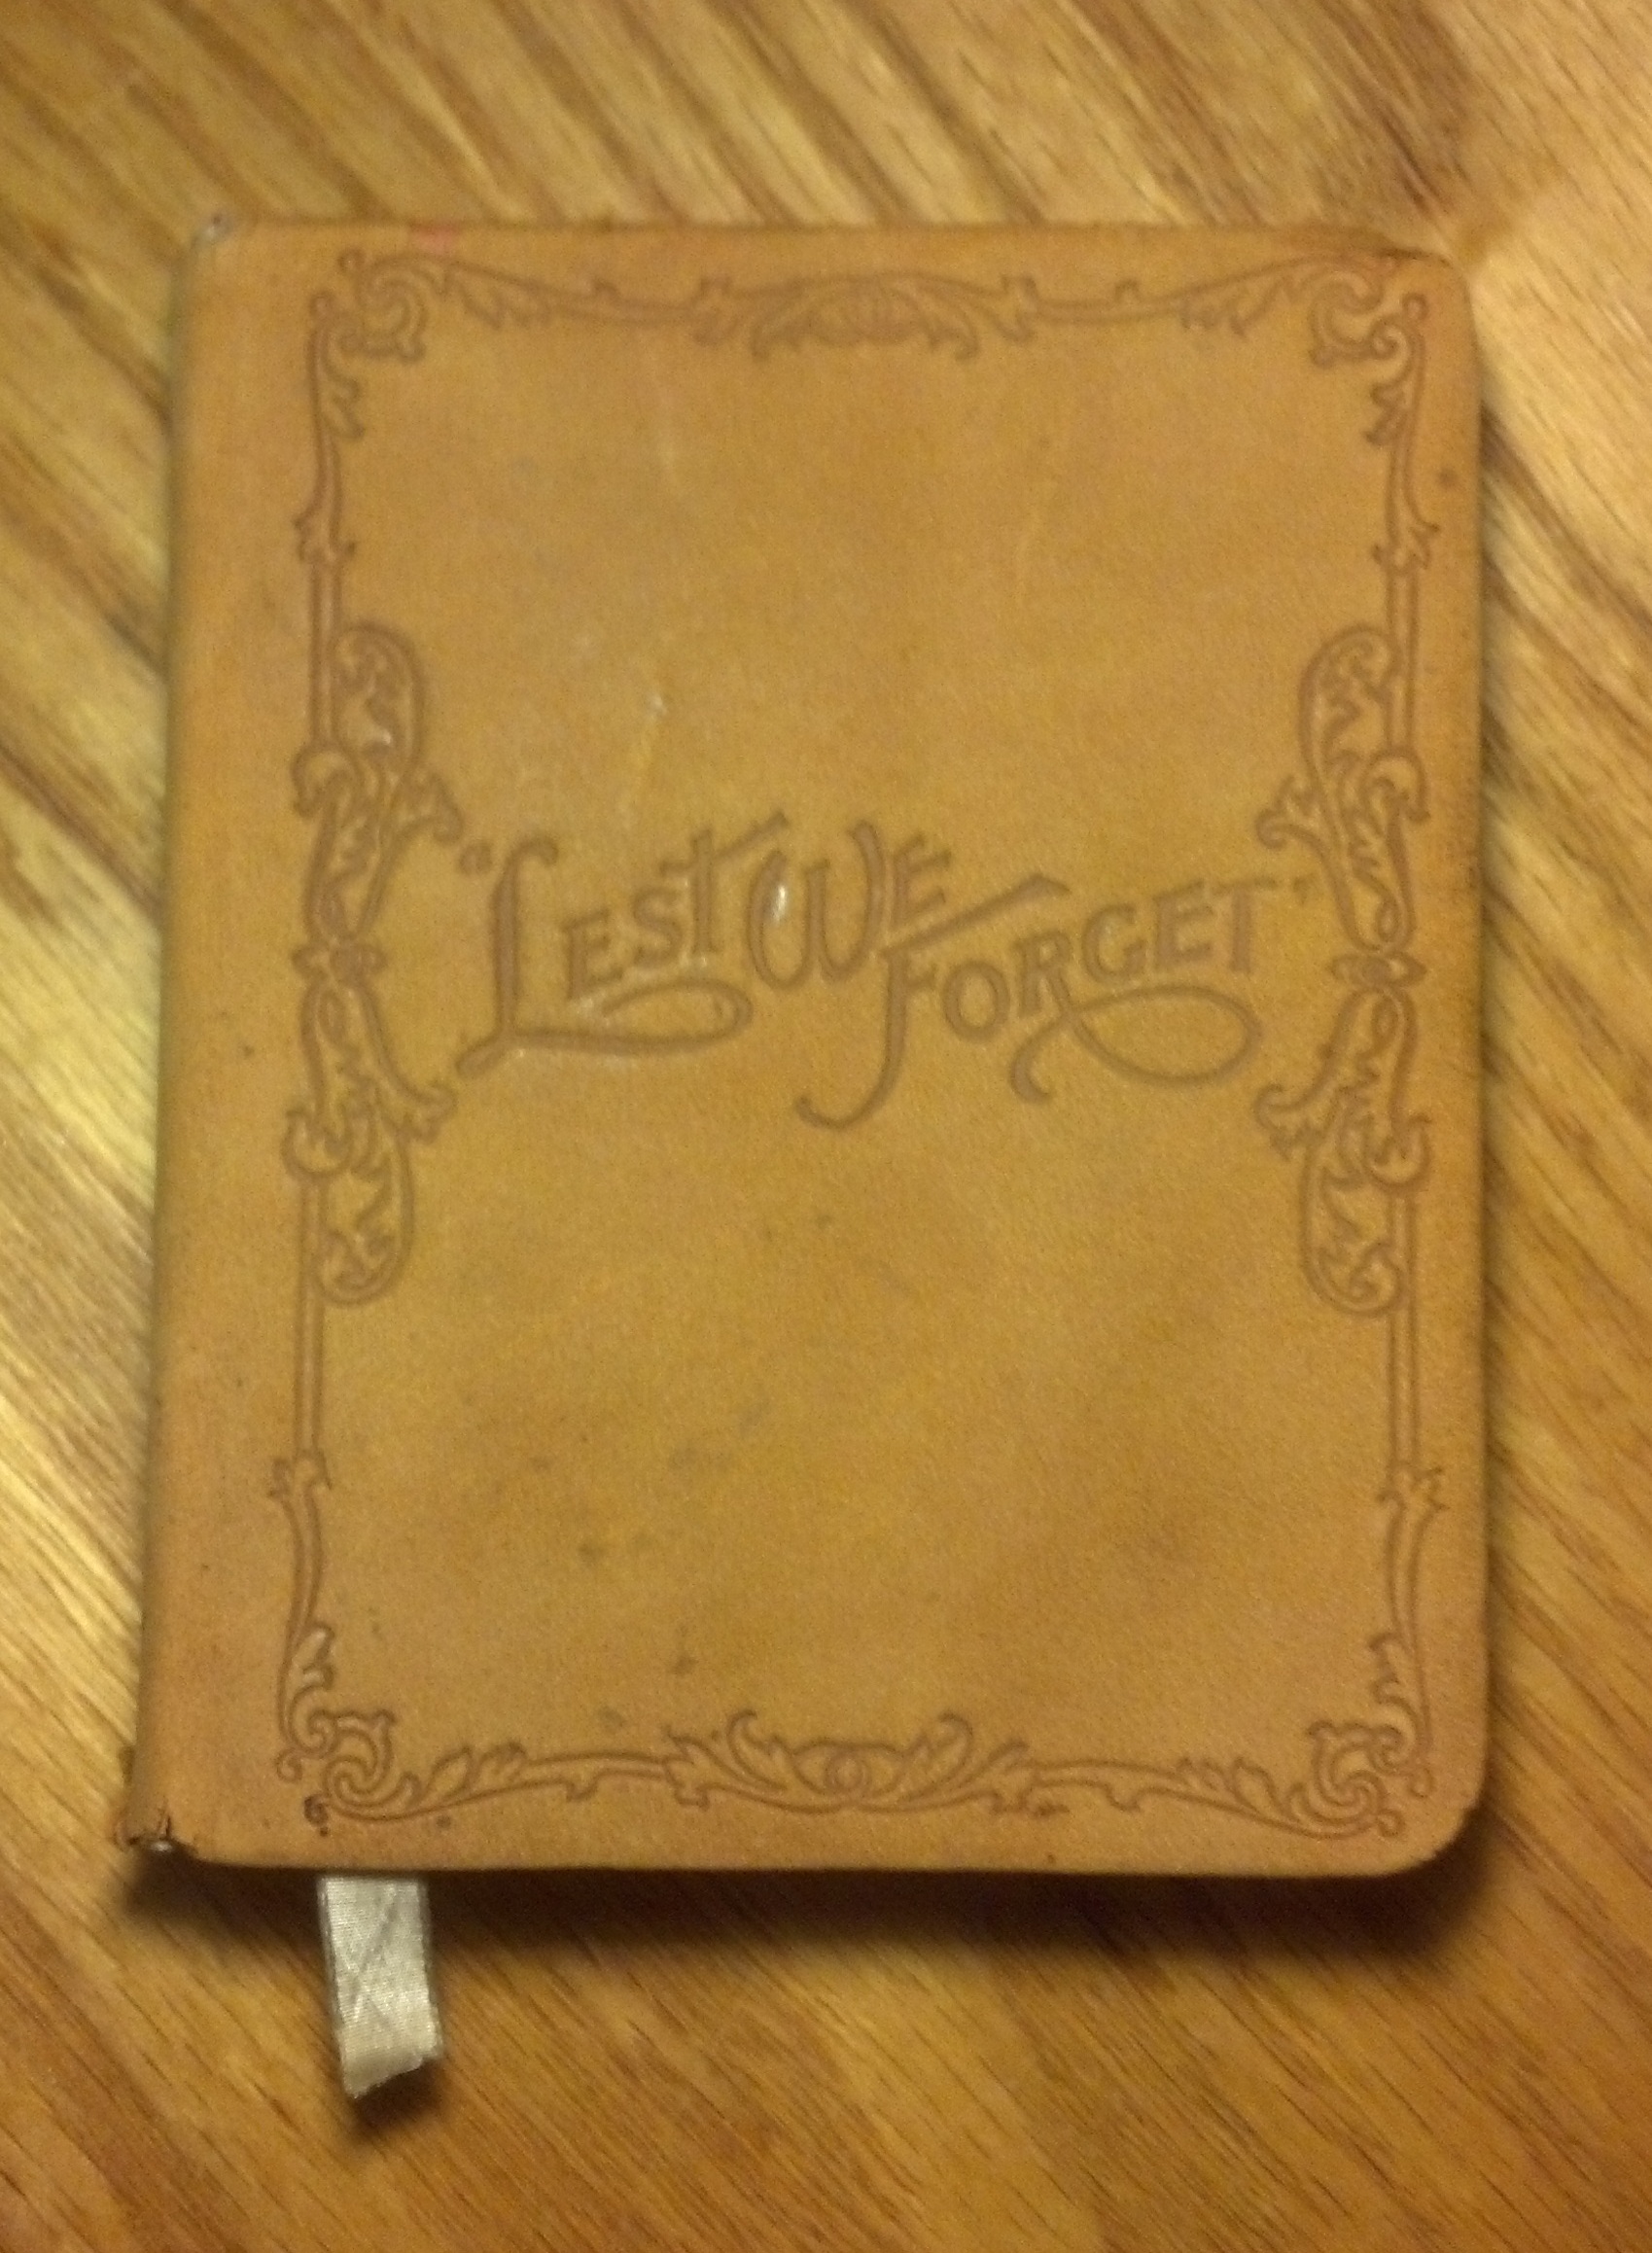 This is the diary "Lest We Forget", a small 4X5 book in its 100th year!